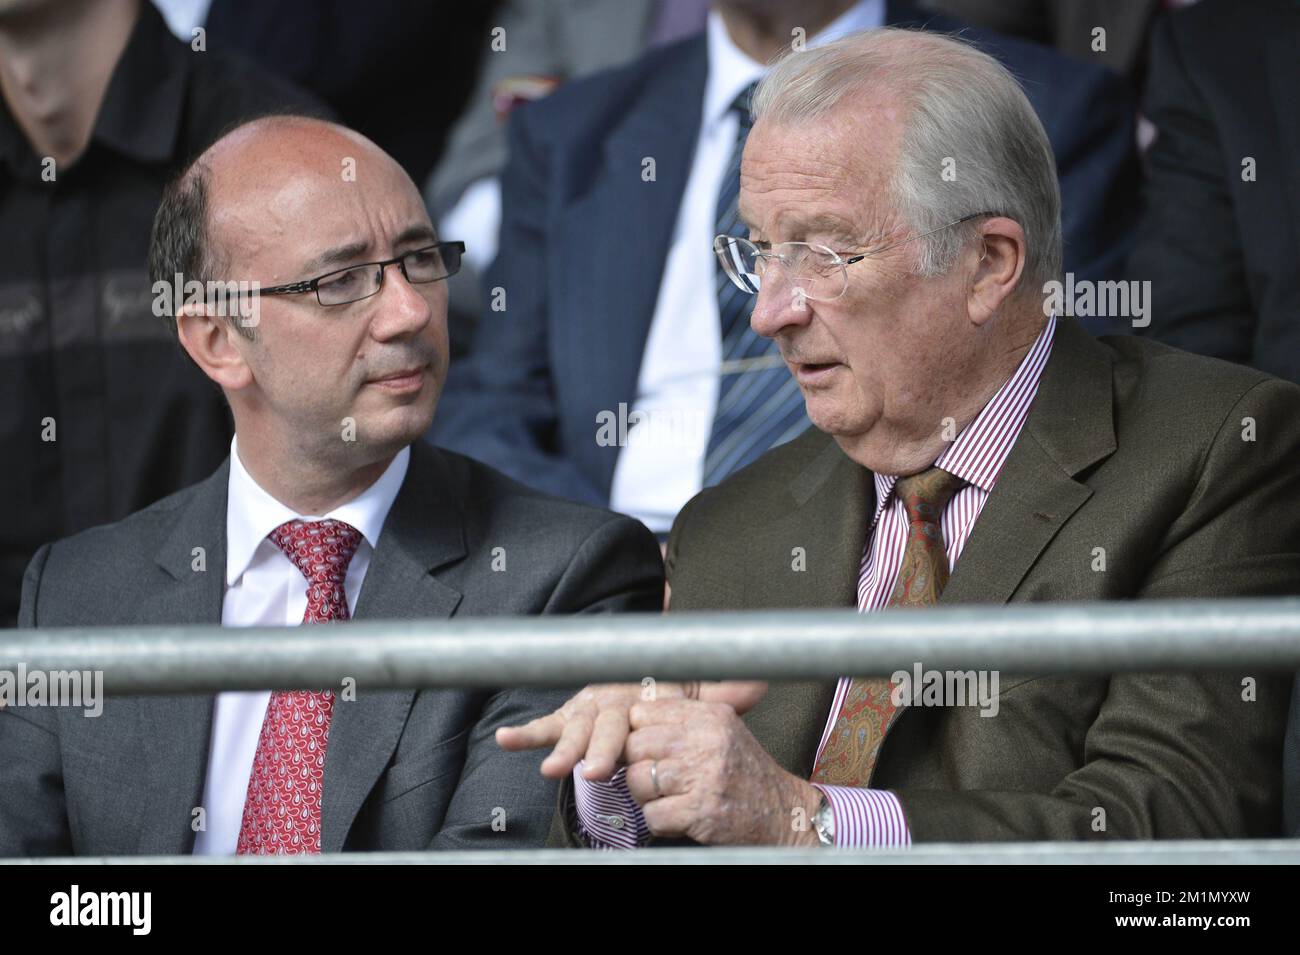 20120702 - LIEGE, BELGIUM: Walloon Minister President Rudy Demotte (PS) and King Albert II of Belgium pictured during the second stage of the 99th edition of the Tour de France cycling race, 207km from Vise to Tournai, Belgium, Monday 02 July 2012. BELGA PHOTO NICOLAS LAMBERT Stock Photo